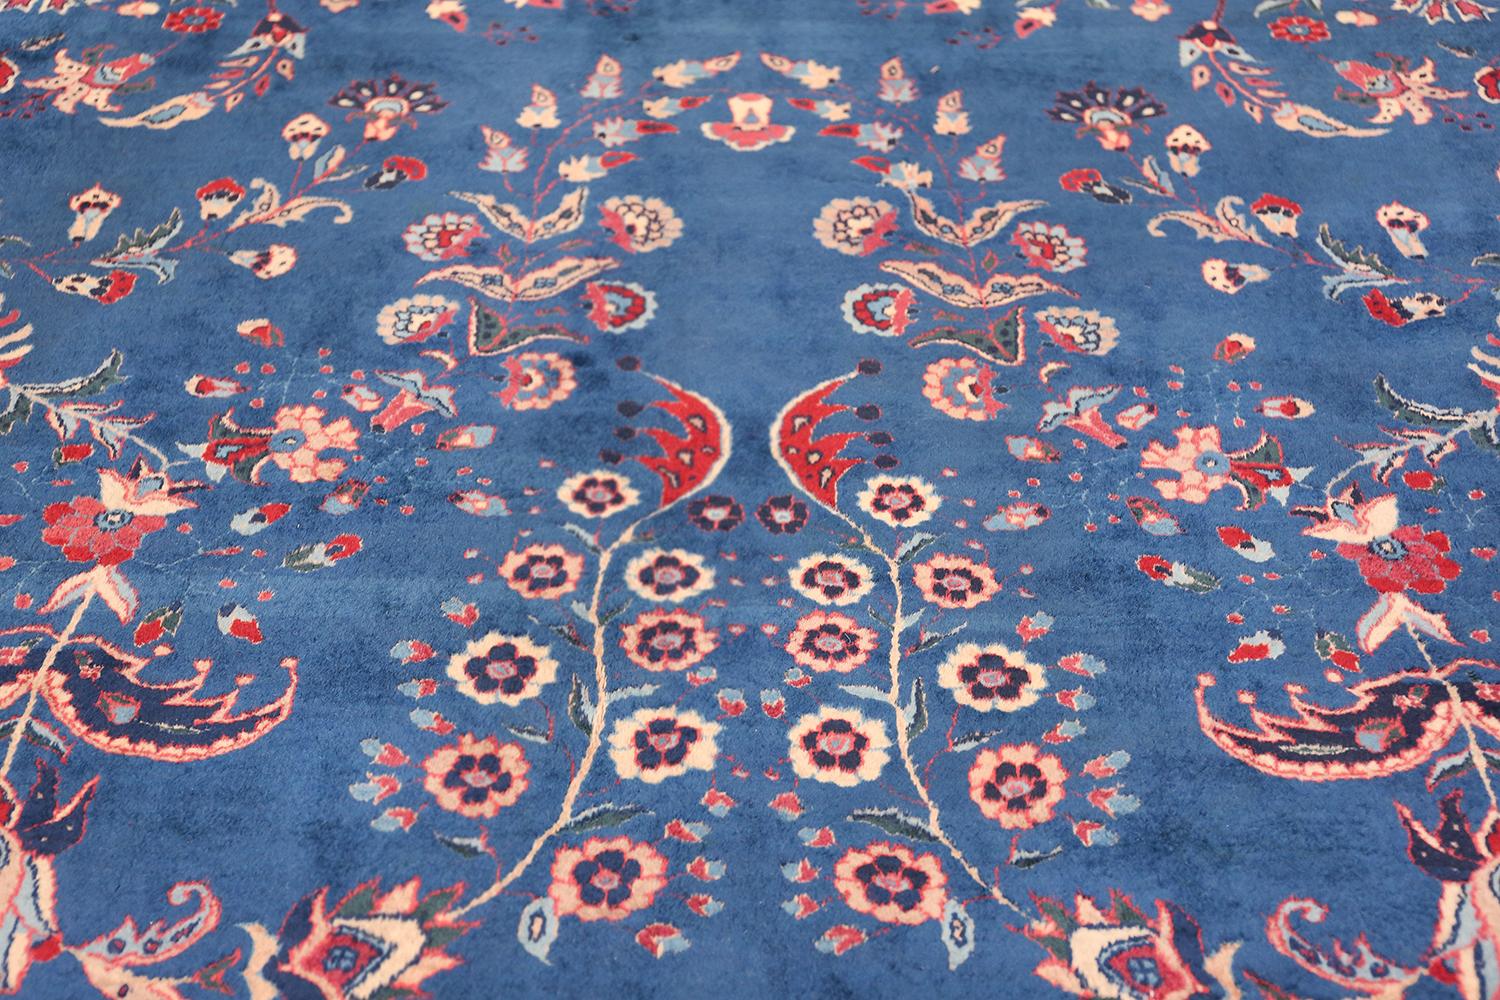 Hand-Knotted Blue Oversize Floral Antique Indian Rug. Size: 17 ft x 20 ft 10 in